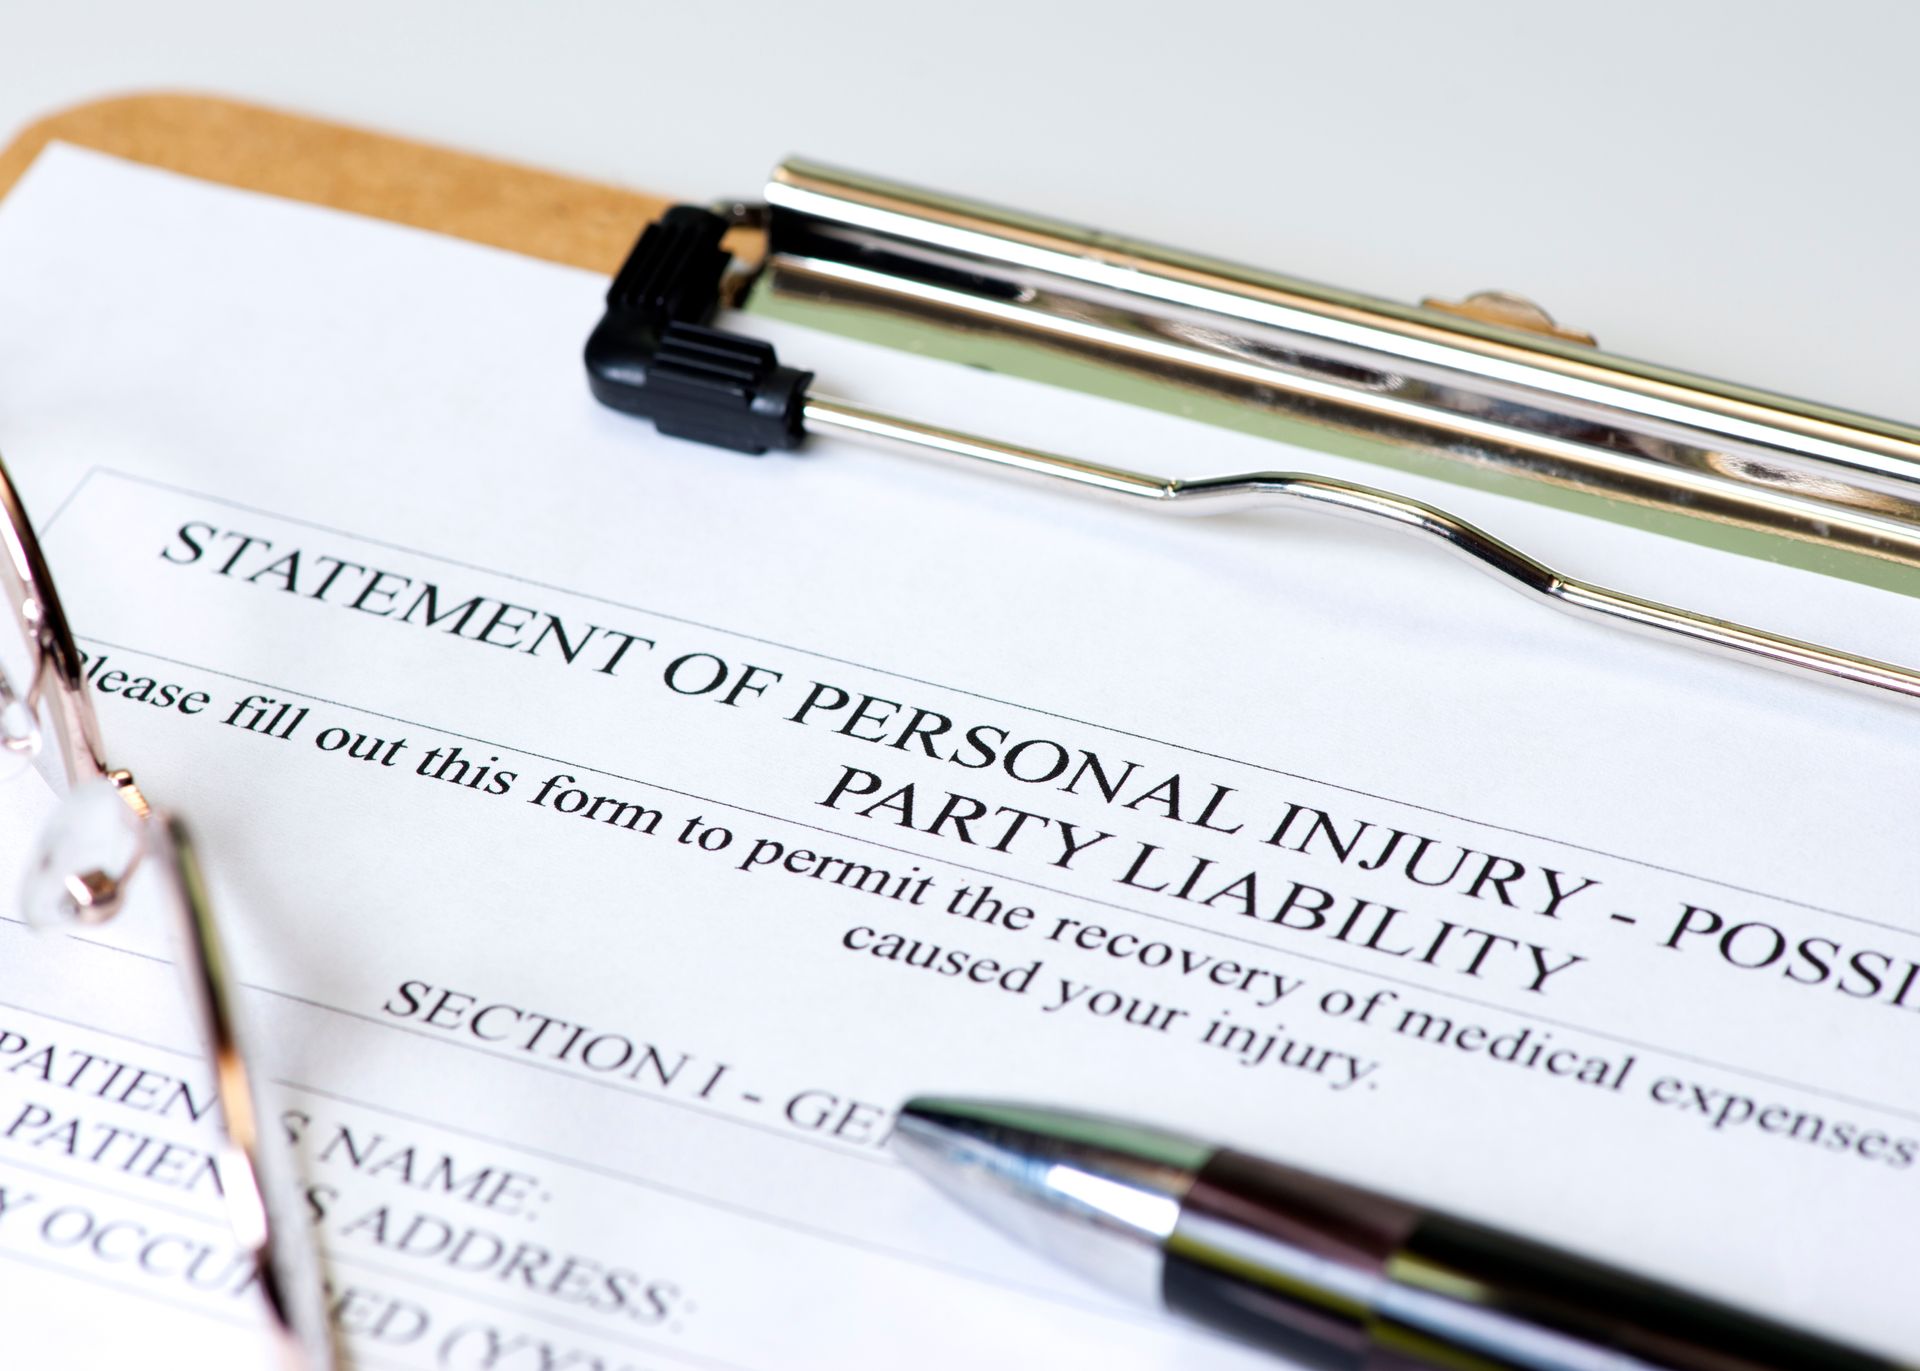 statement of personal injury claim and liability